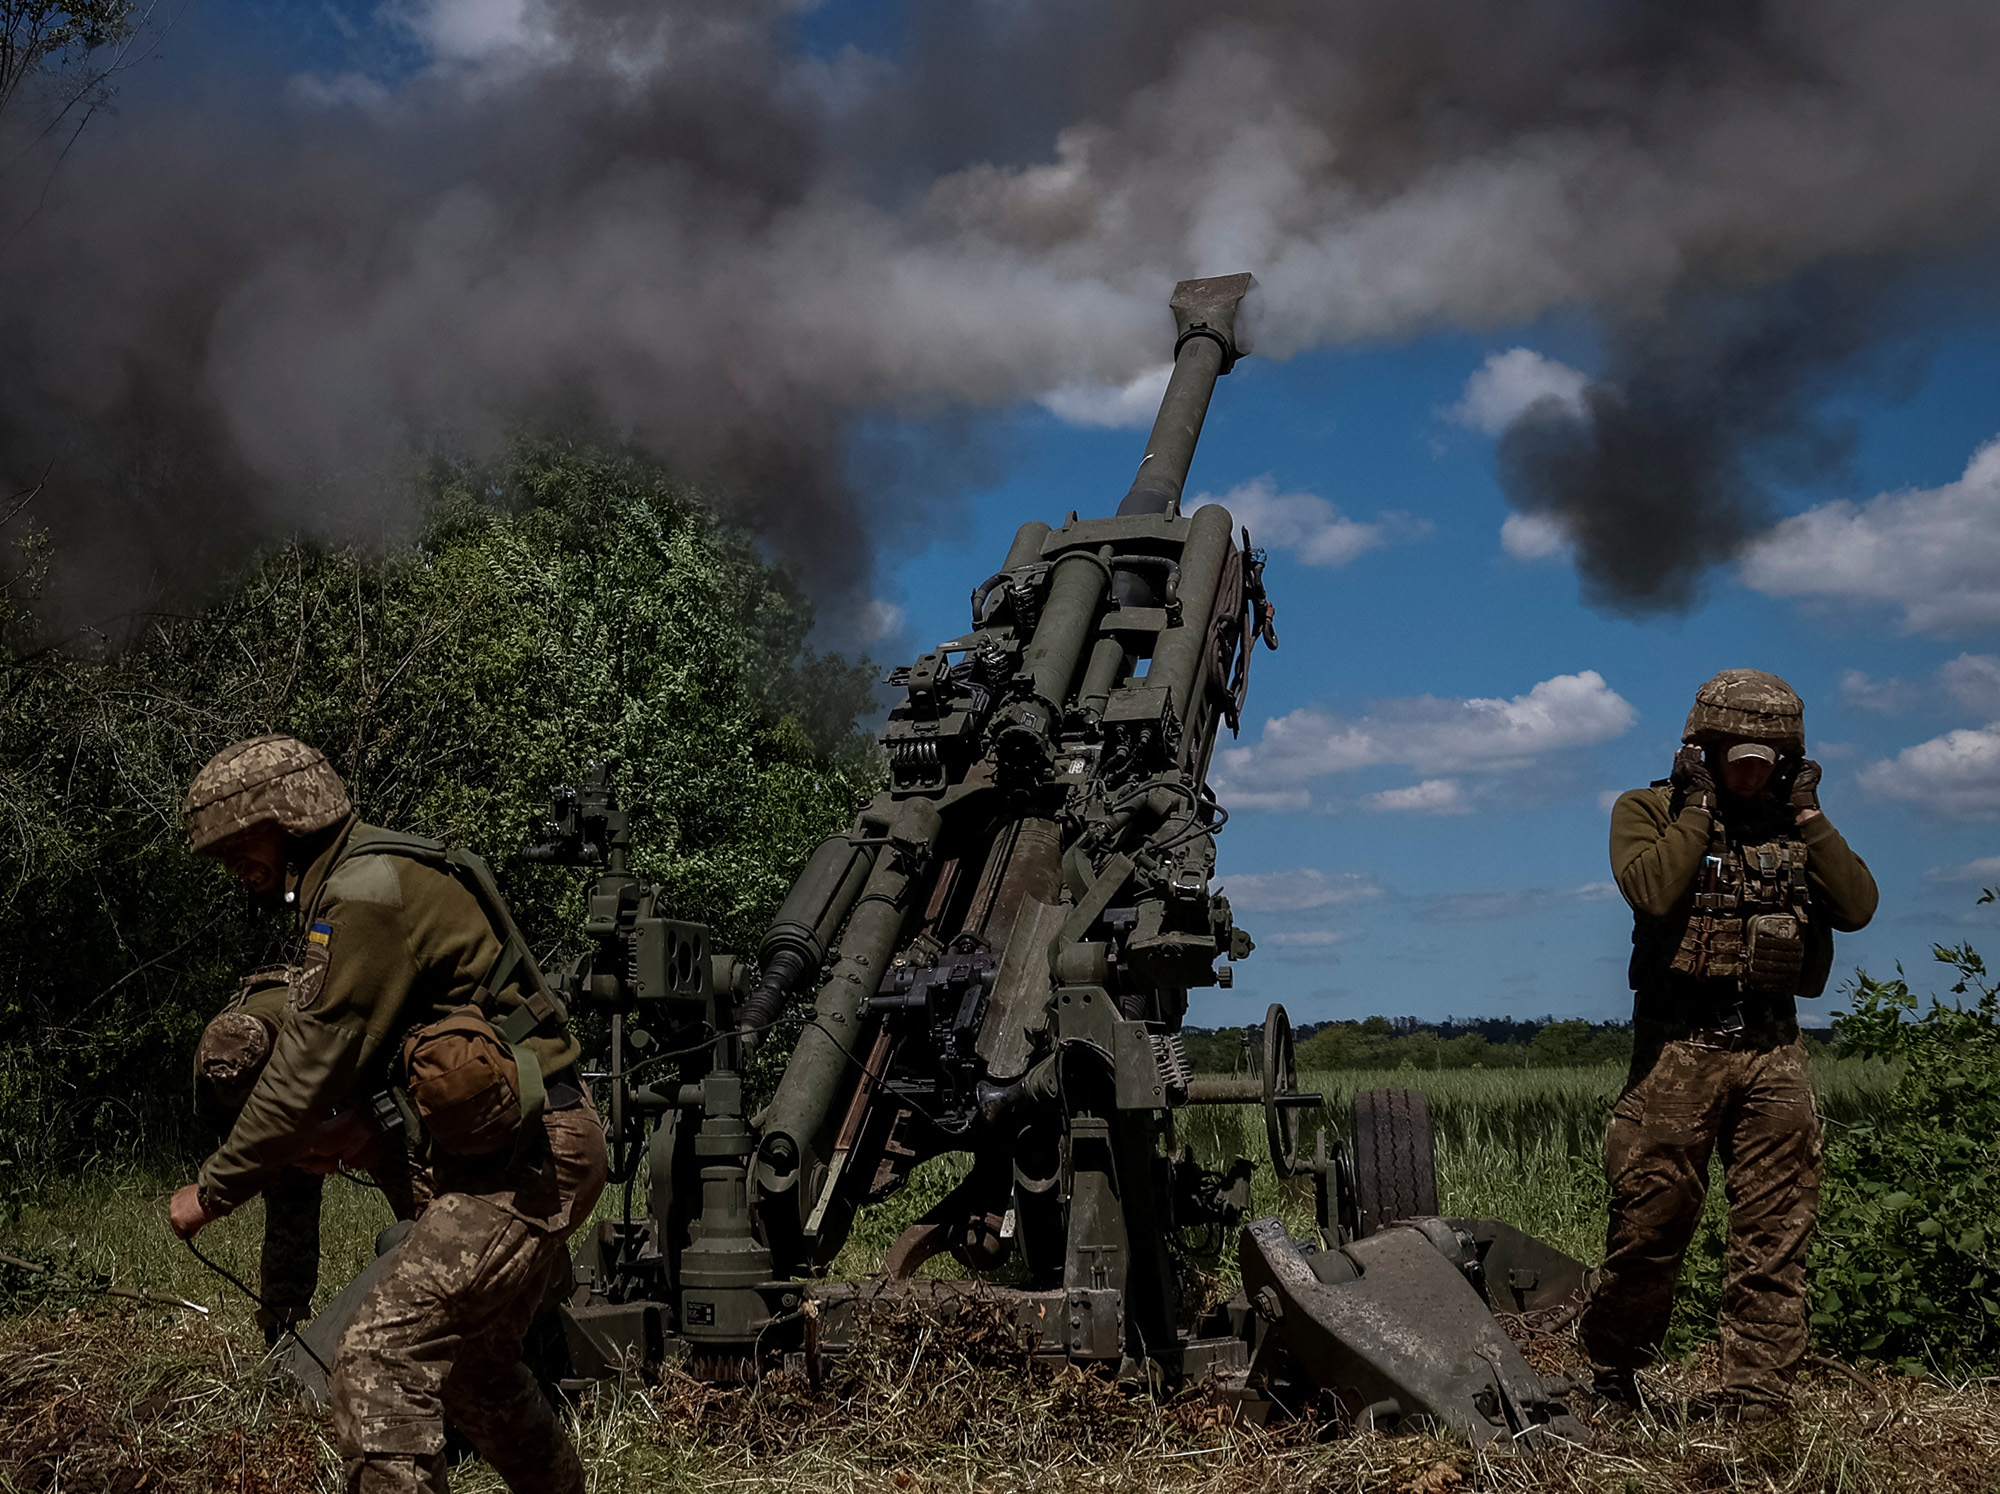 Ukrainian military fire a shell from a M777 Howitzer near the front line in the Donetsk region, Ukraine, on June 6.